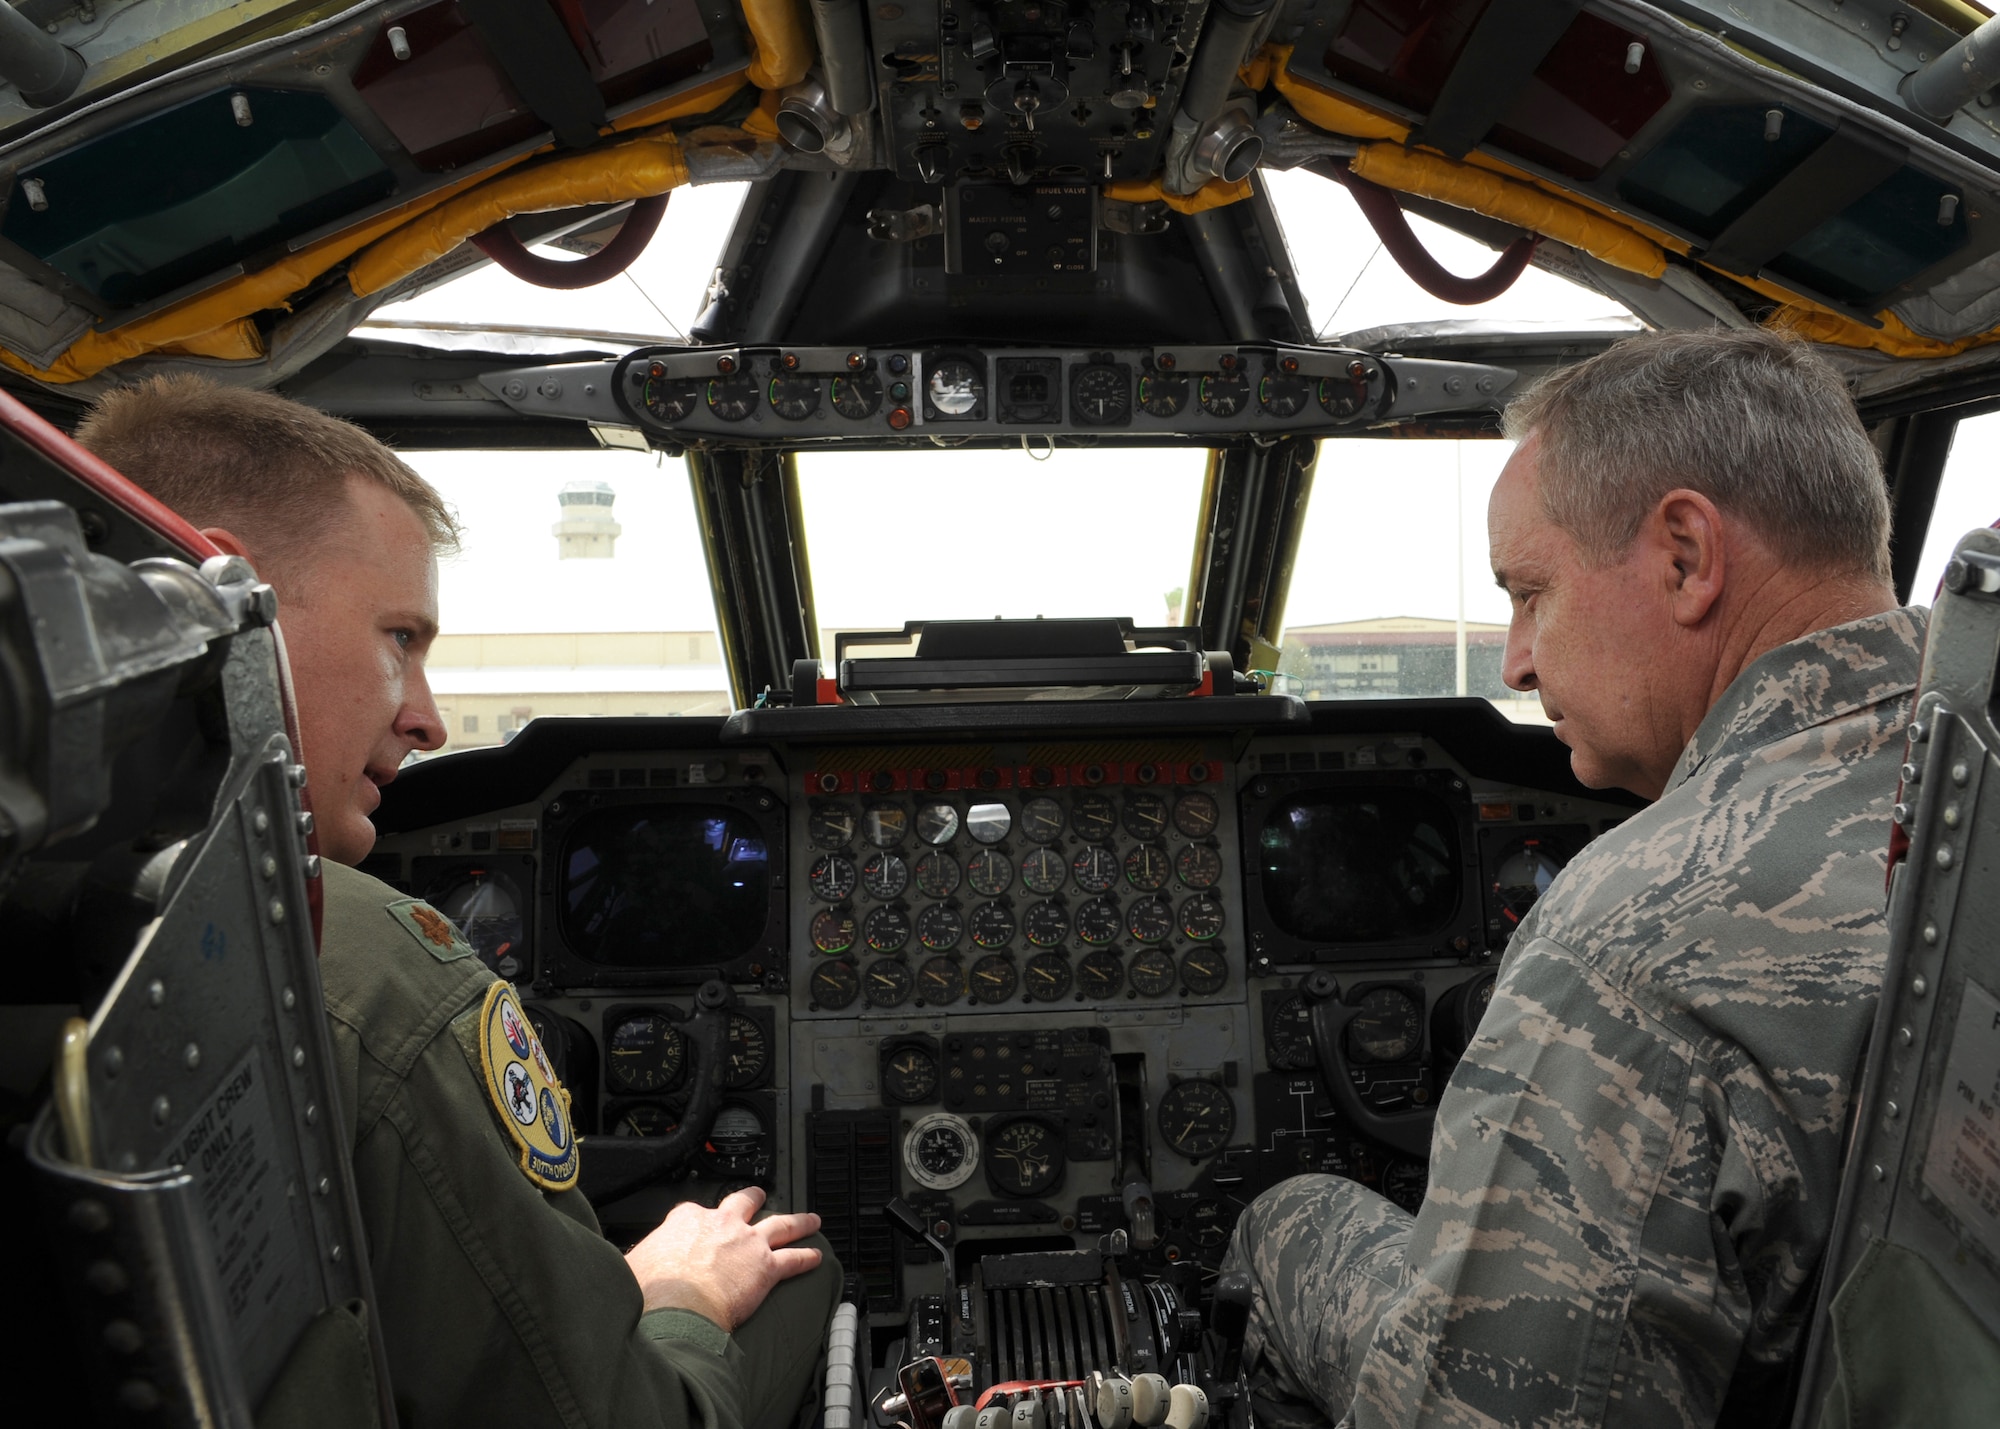 Maj. Bryan Bailey, a 307th Bomb Wing instructor pilot, sits alongside Air Force Chief of Staff Gen. Mark A. Welsh III, aboard a B-52H Stratofortress bomber, highlighting the airplane’s capabilities. Welsh and Chief Master Sgt. of the Air Force James Cody met with Airmen at Barksdale Air Force Base, La., during a visit April 2-3, 2013, reinforcing the importance of Air Force Global Strike Command’s mission to provide combat ready forces for nuclear deterrence and global strike operations. (U.S. Air Force photo/Airman 1st Class Joseph Pagan)